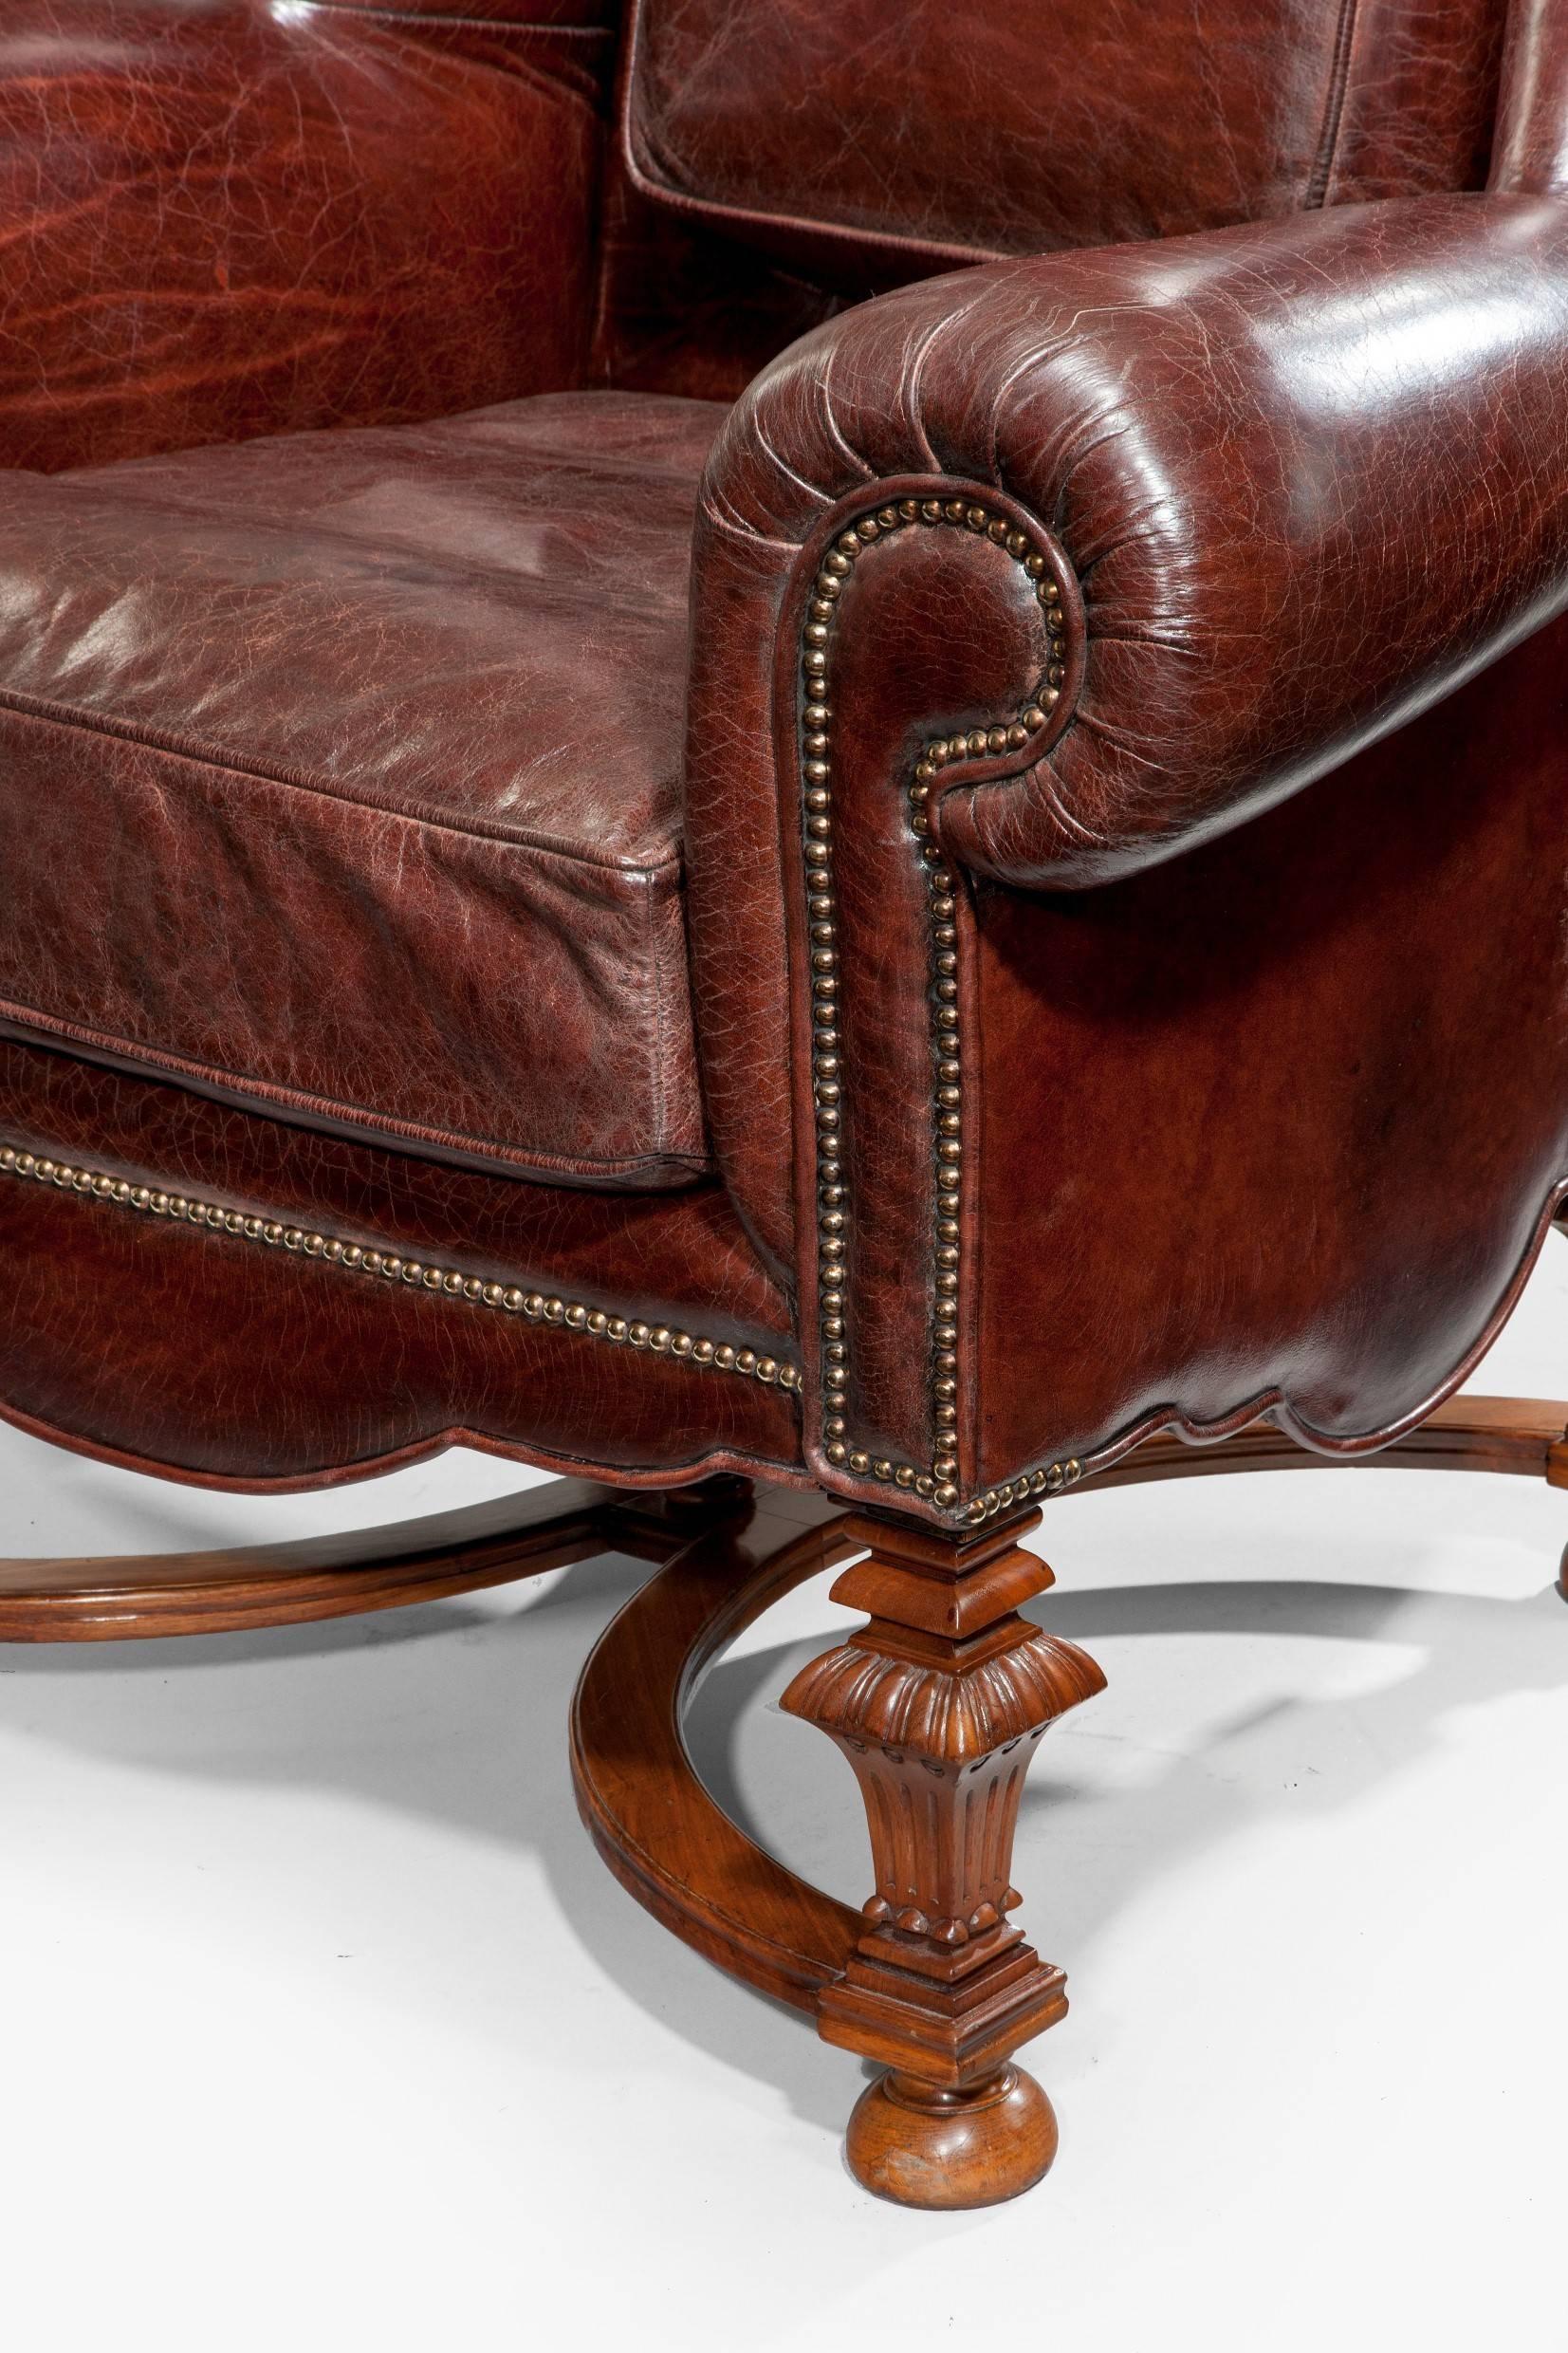 A very grand pair of oversized gentlemen’s walnut wing armchairs, reupholstered in distressed leather.